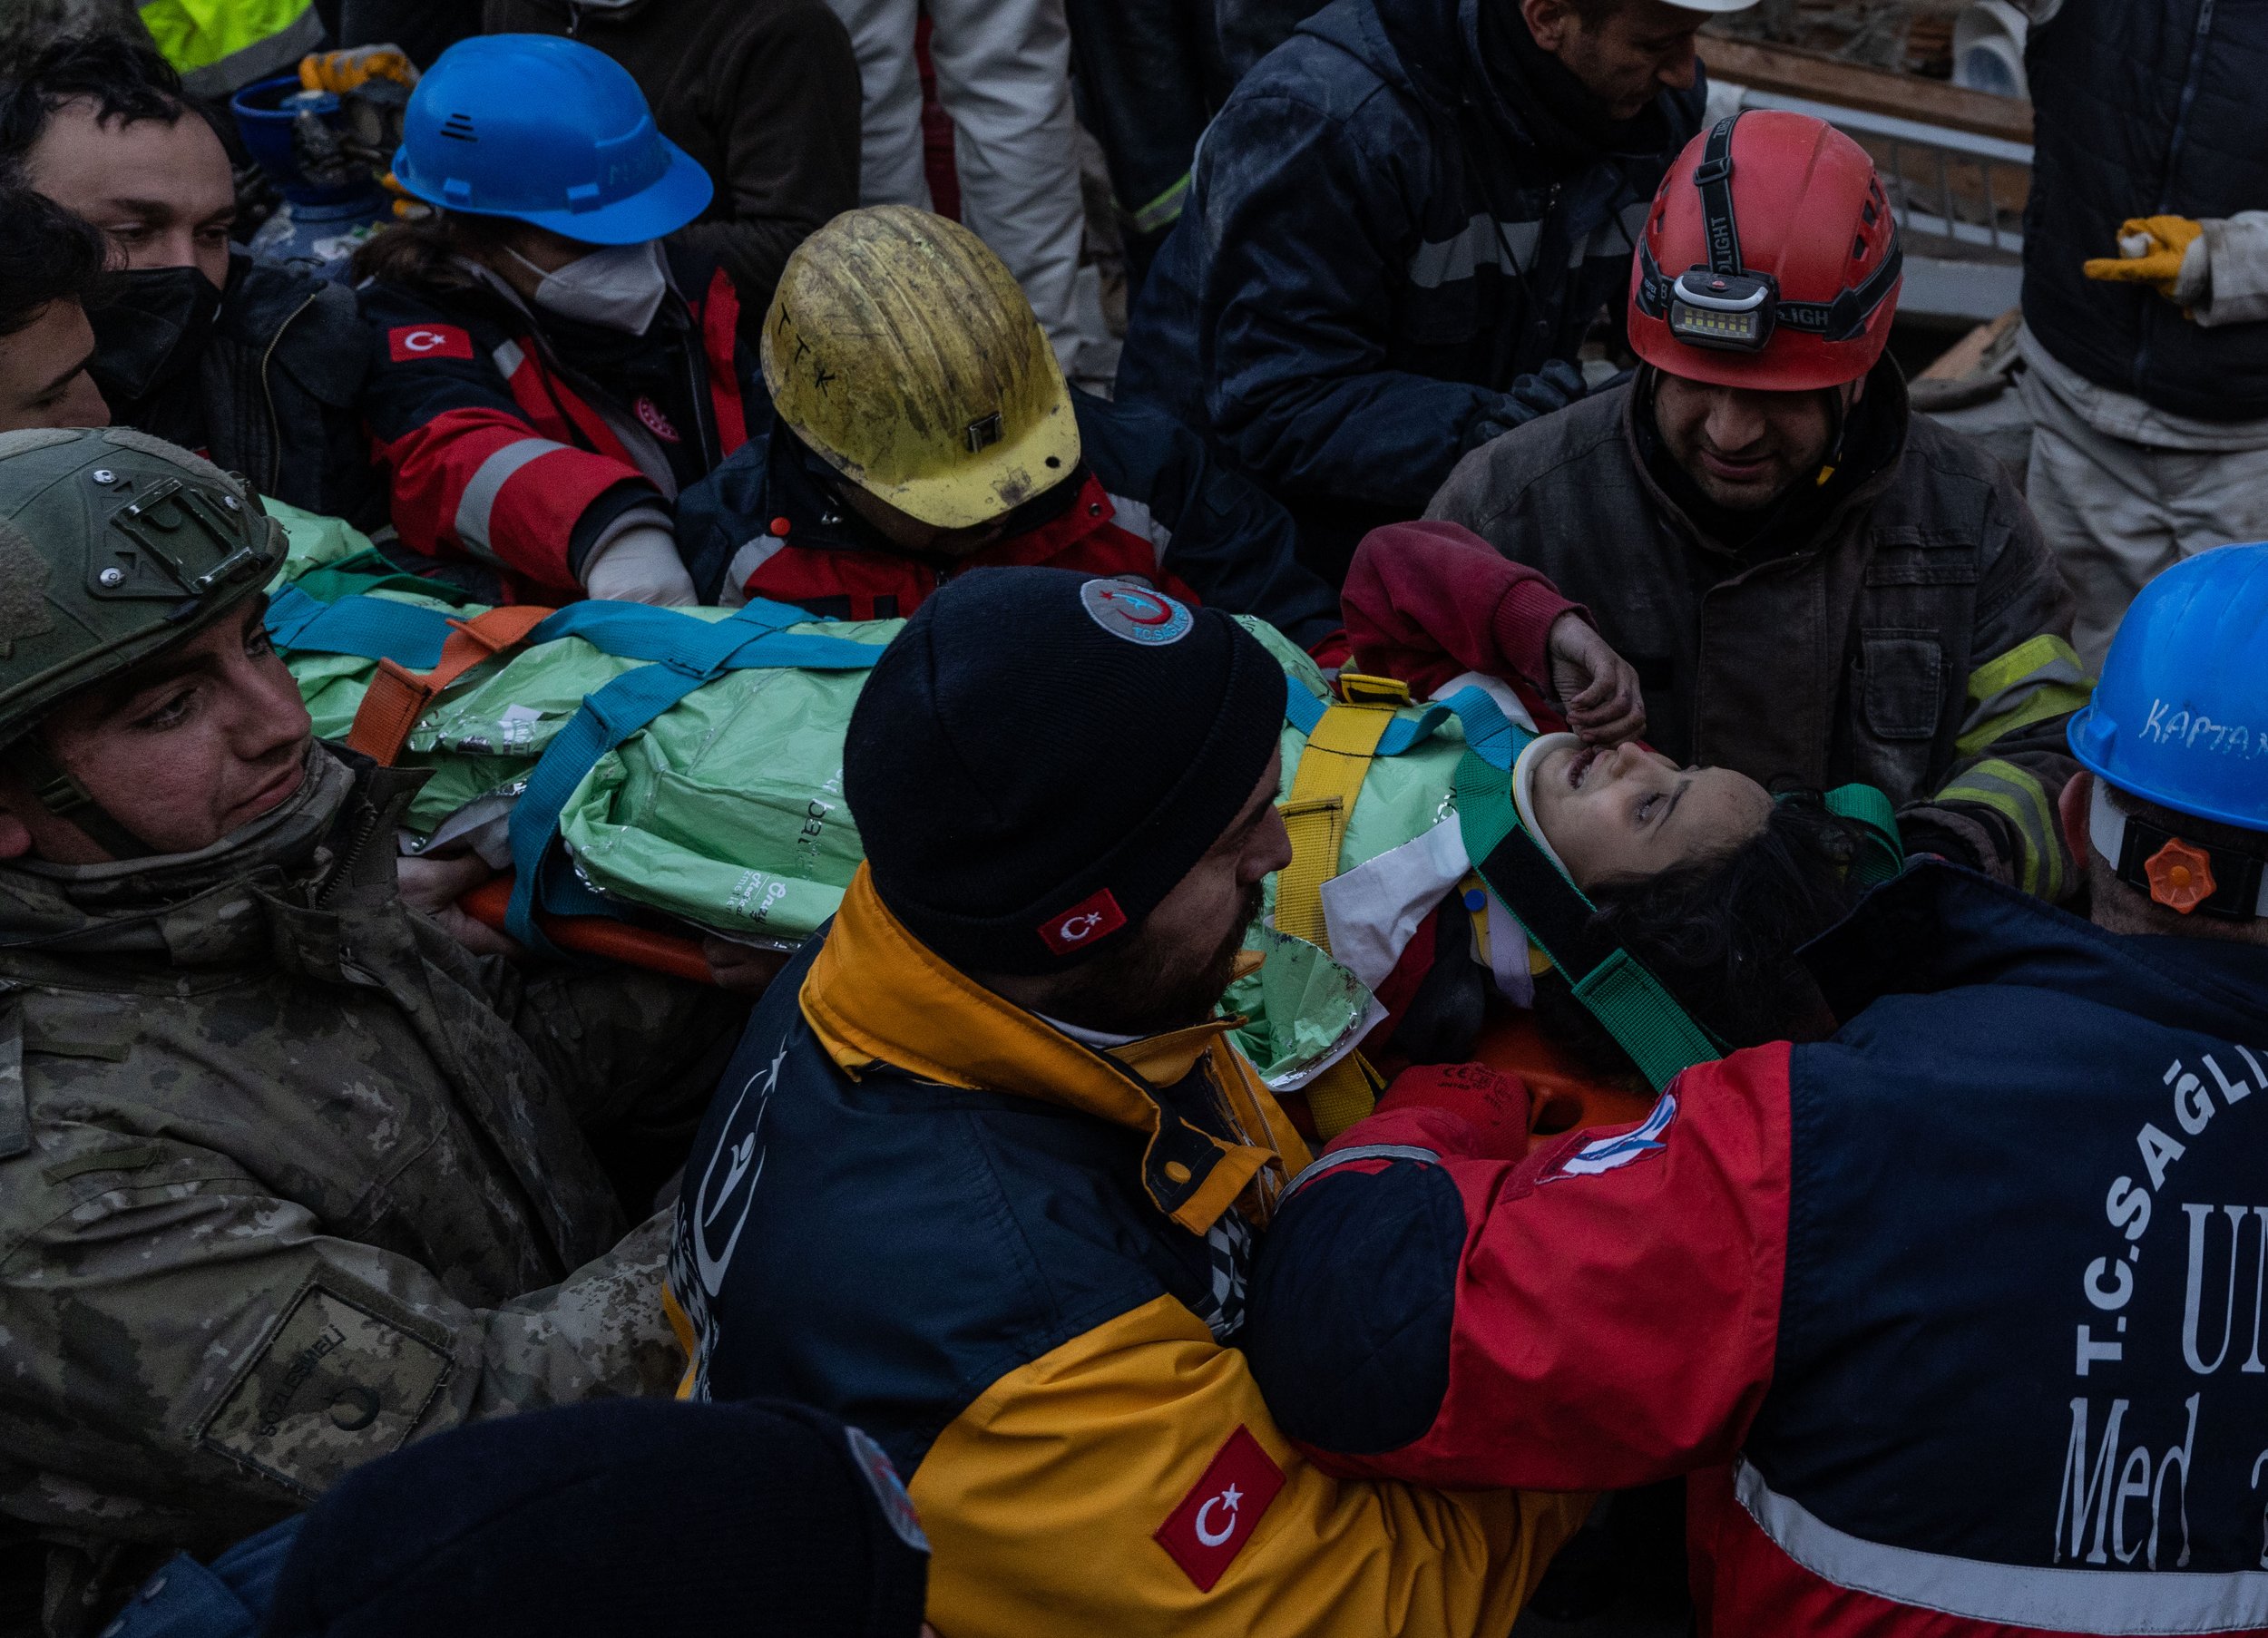  The rescue of seven-year-old, Aya, who has been trapped under a collapsed apartment building for six days following the earthquake that hit Turkey and Syria on February 6, 2023. 